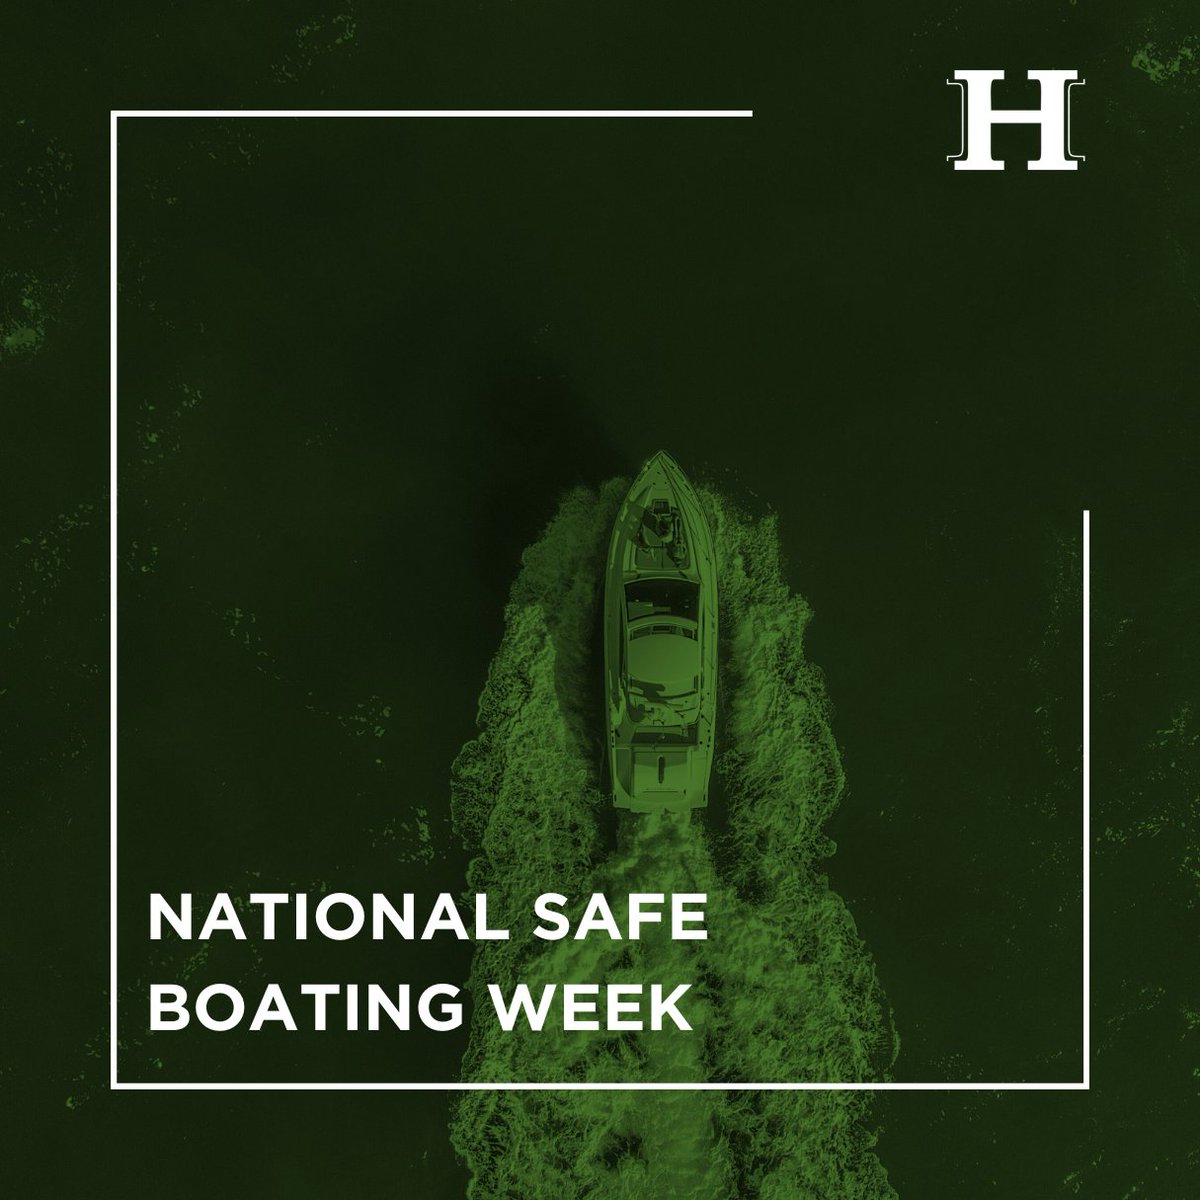 🌊Smooth sailing isn't just luck—it's about smart choices. Boating safety isn't an option; it's a necessity. From life jackets to navigation, let's ensure every voyage is a safe voyage. #HotalingInsuranceServices #HIS #BoatingSafety #SafetyFirst #Hotaling⚓